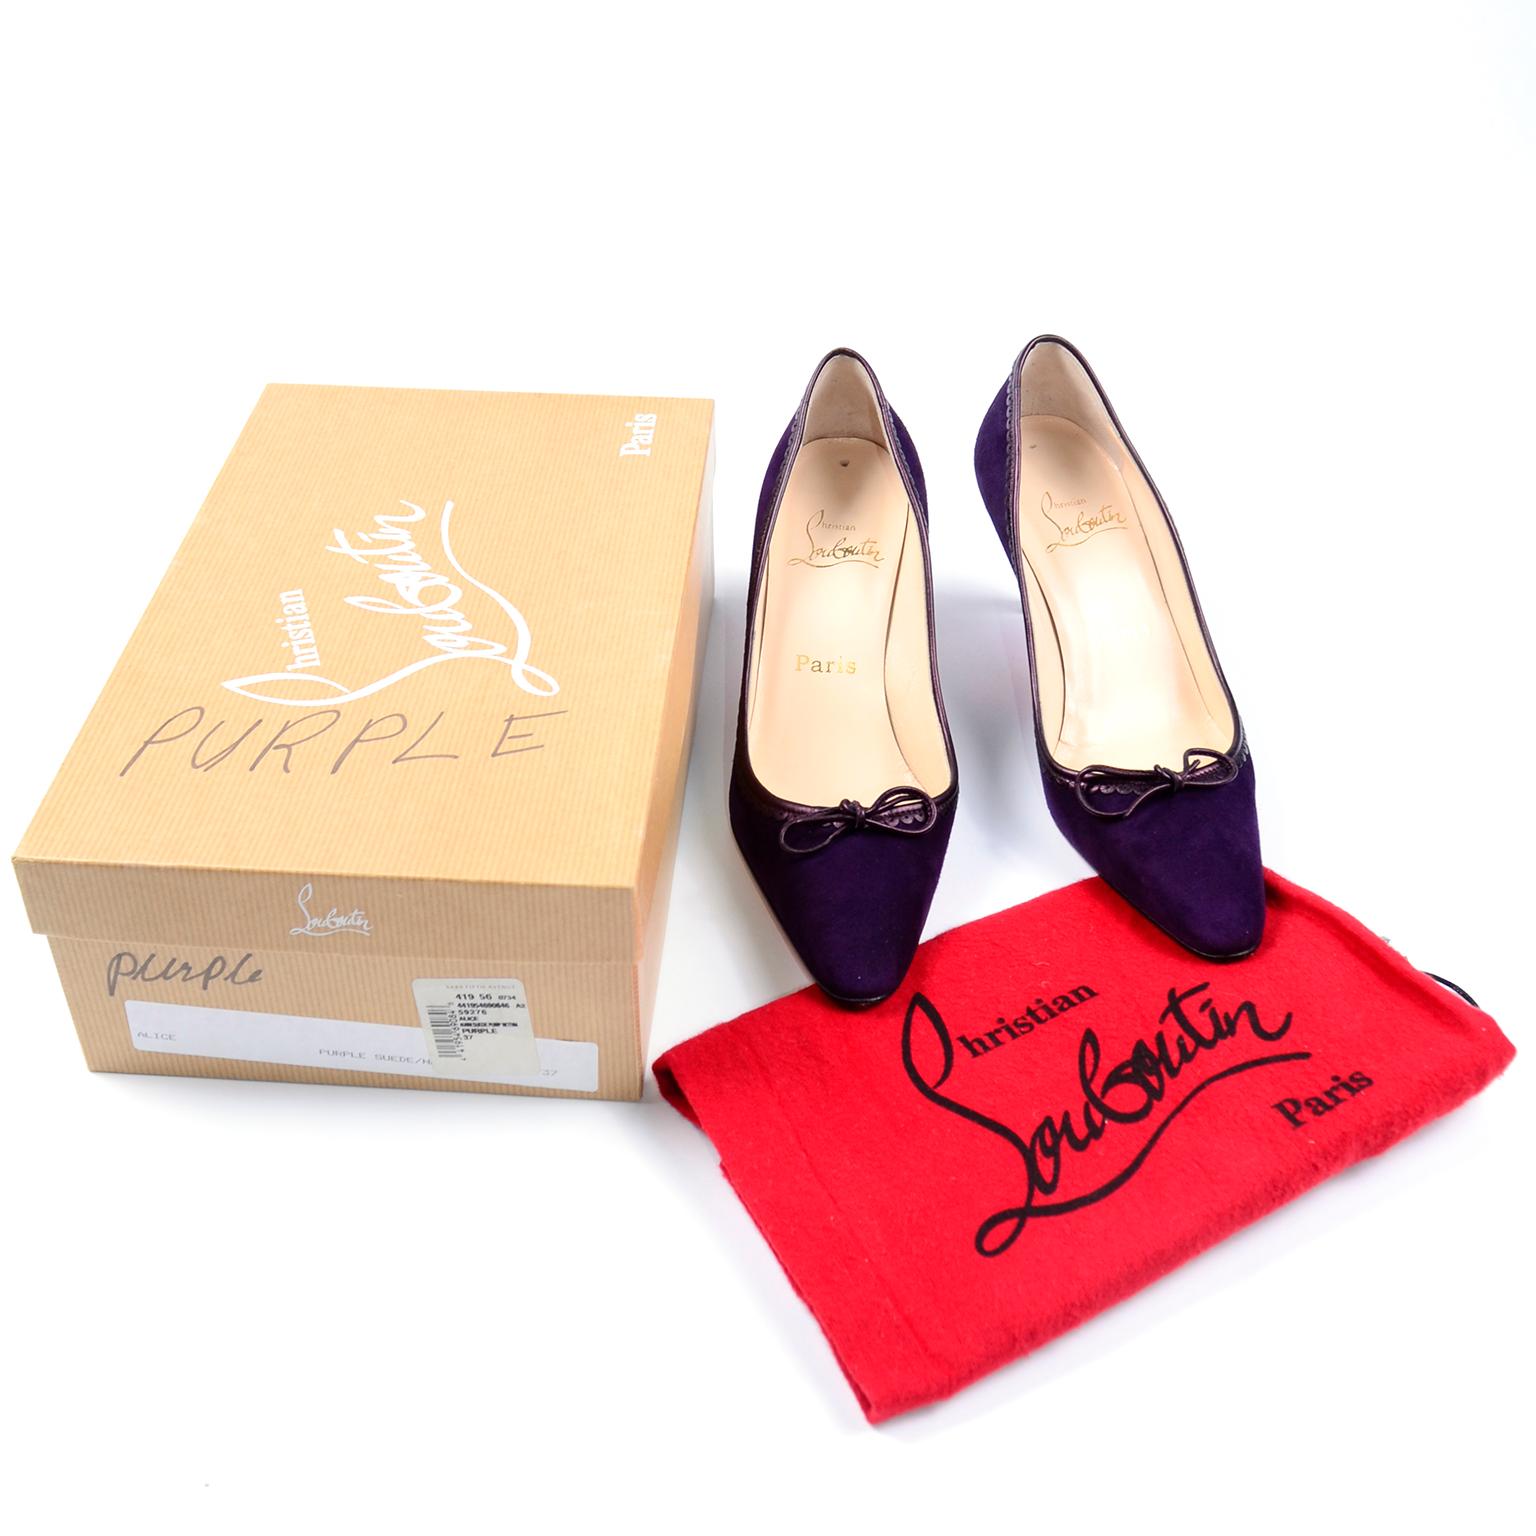 These Christian Louboutin deep purple suede pointed toe pumps have metallic leather trim and a bow on the toe box. These shoes are a fun take on a classic pump silhouette. The purple suede is very rich against the signature Louboutin red bottom